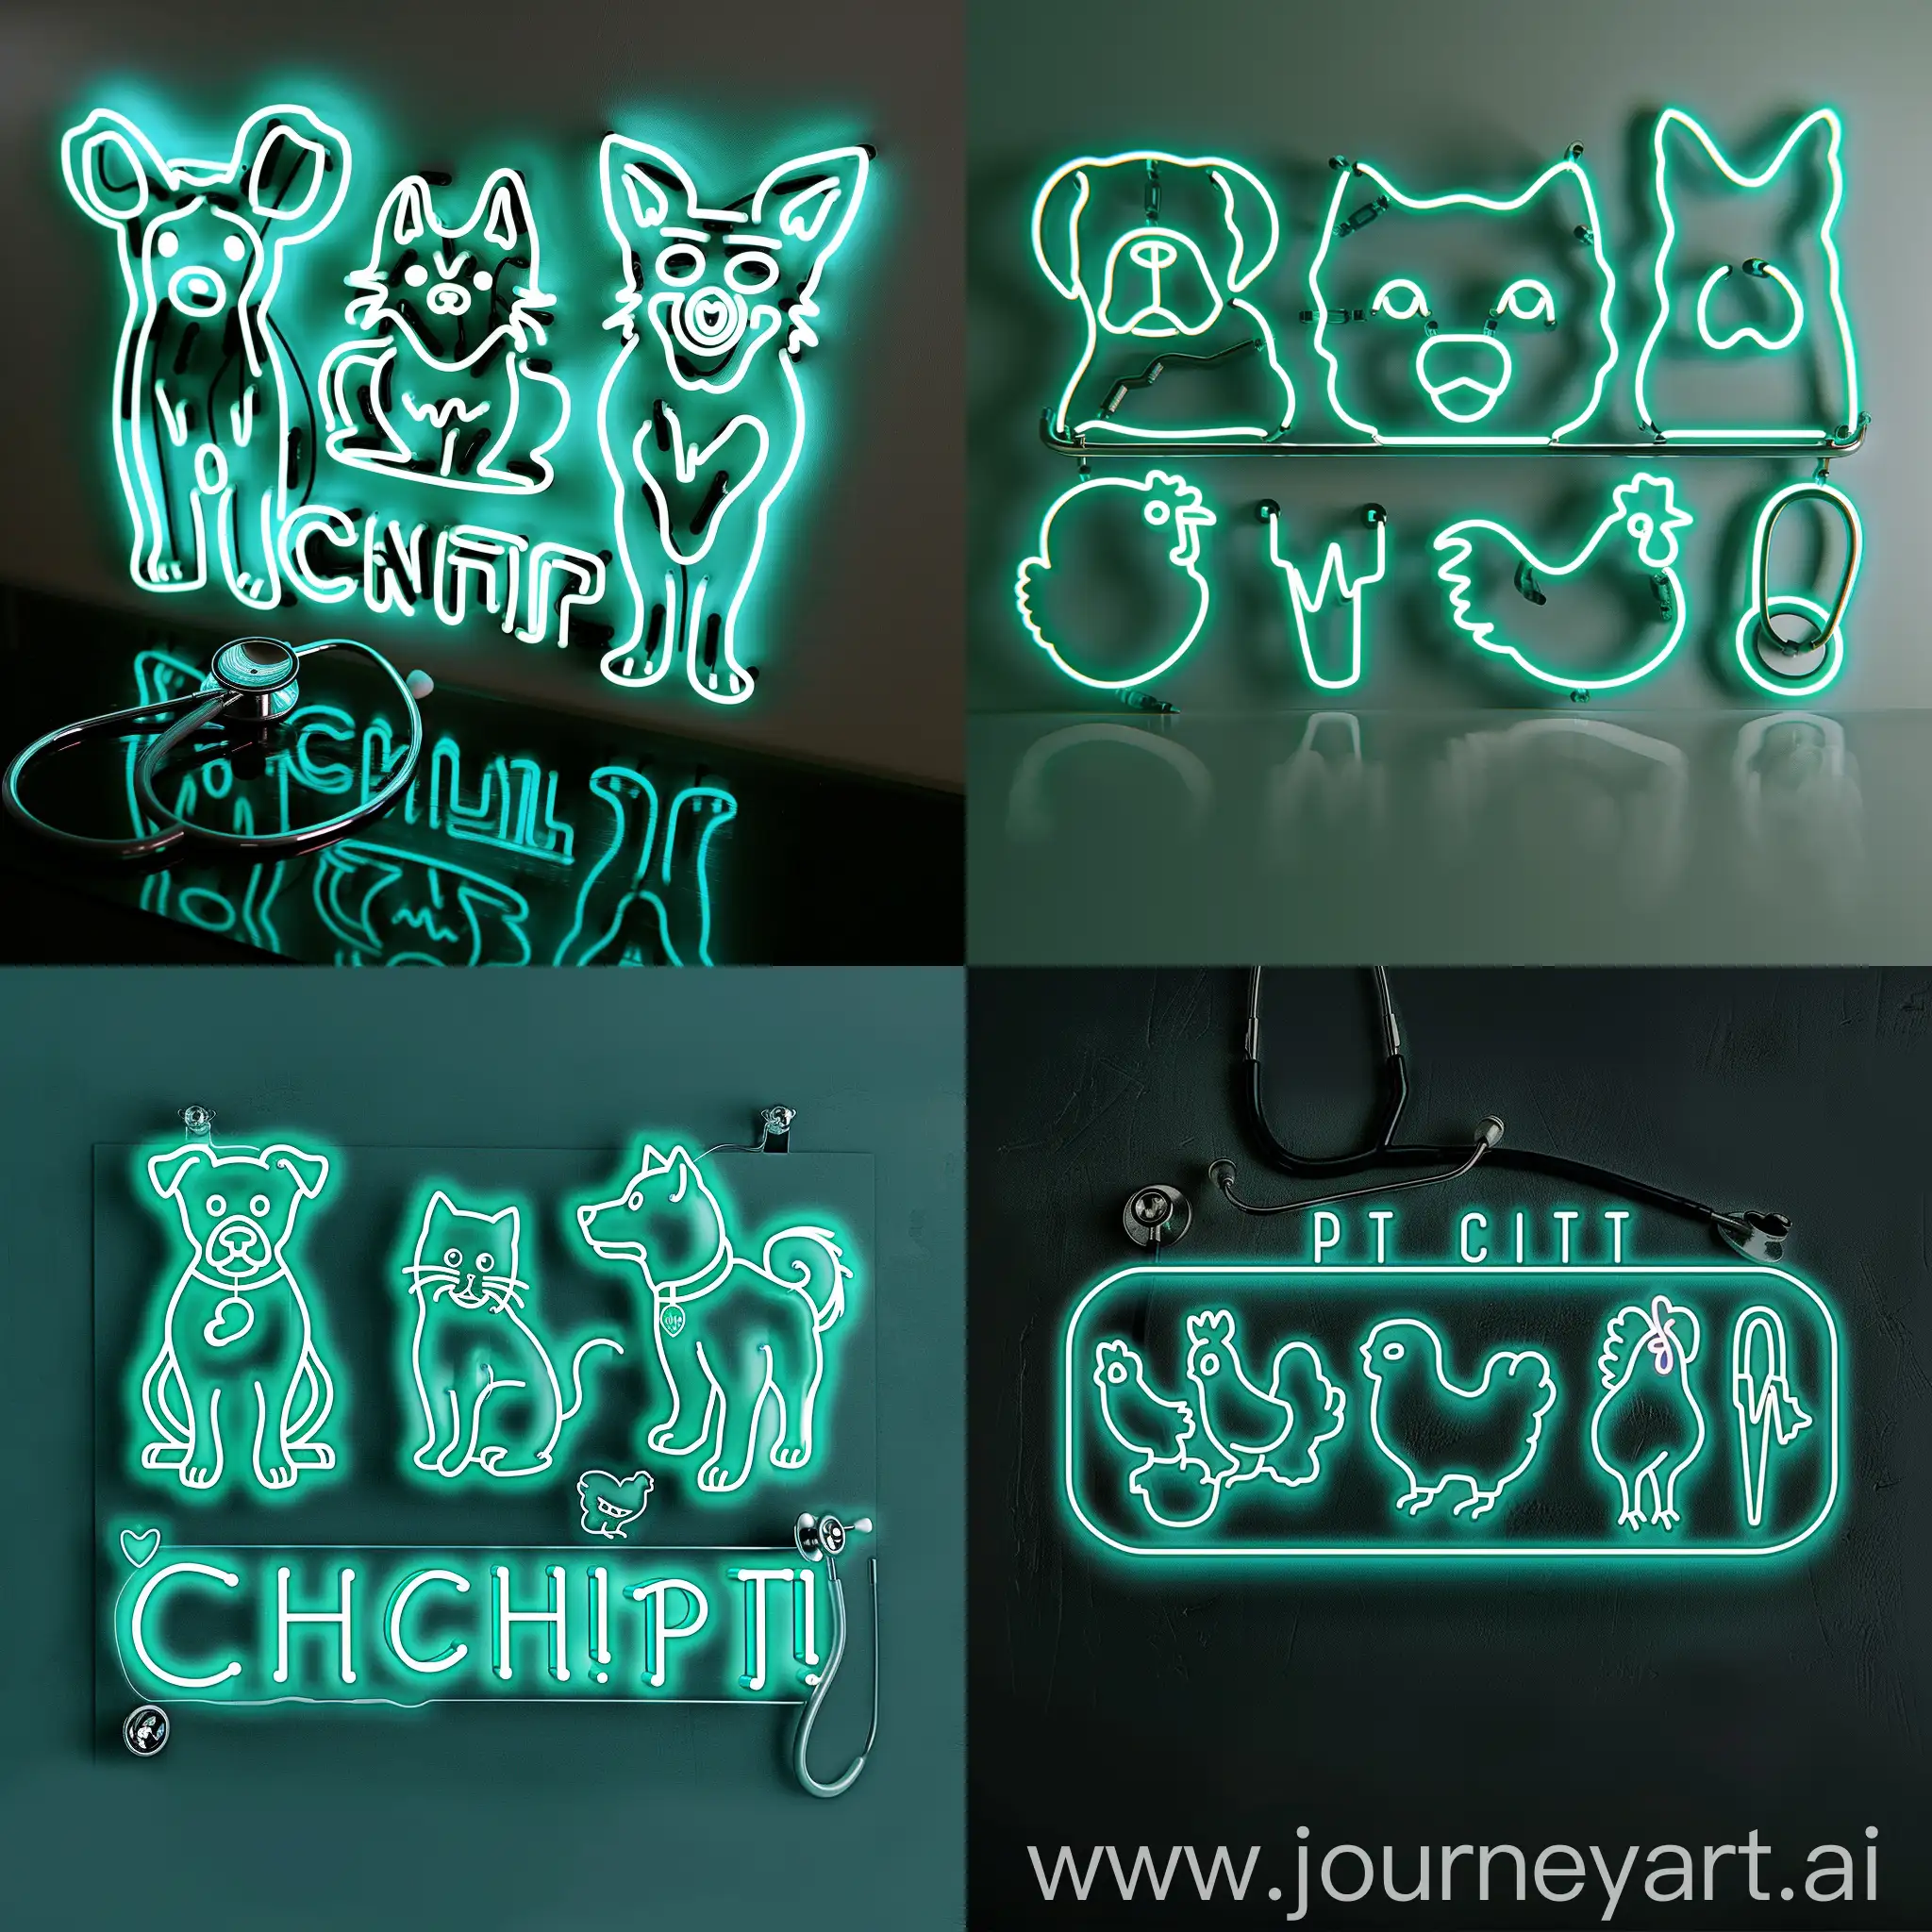 give me a turquoise color pet clinic banner in the white background that created from neon lights with shape of dog , cat and chicken in the banner and a word beside 
and  a doctor stethoscope